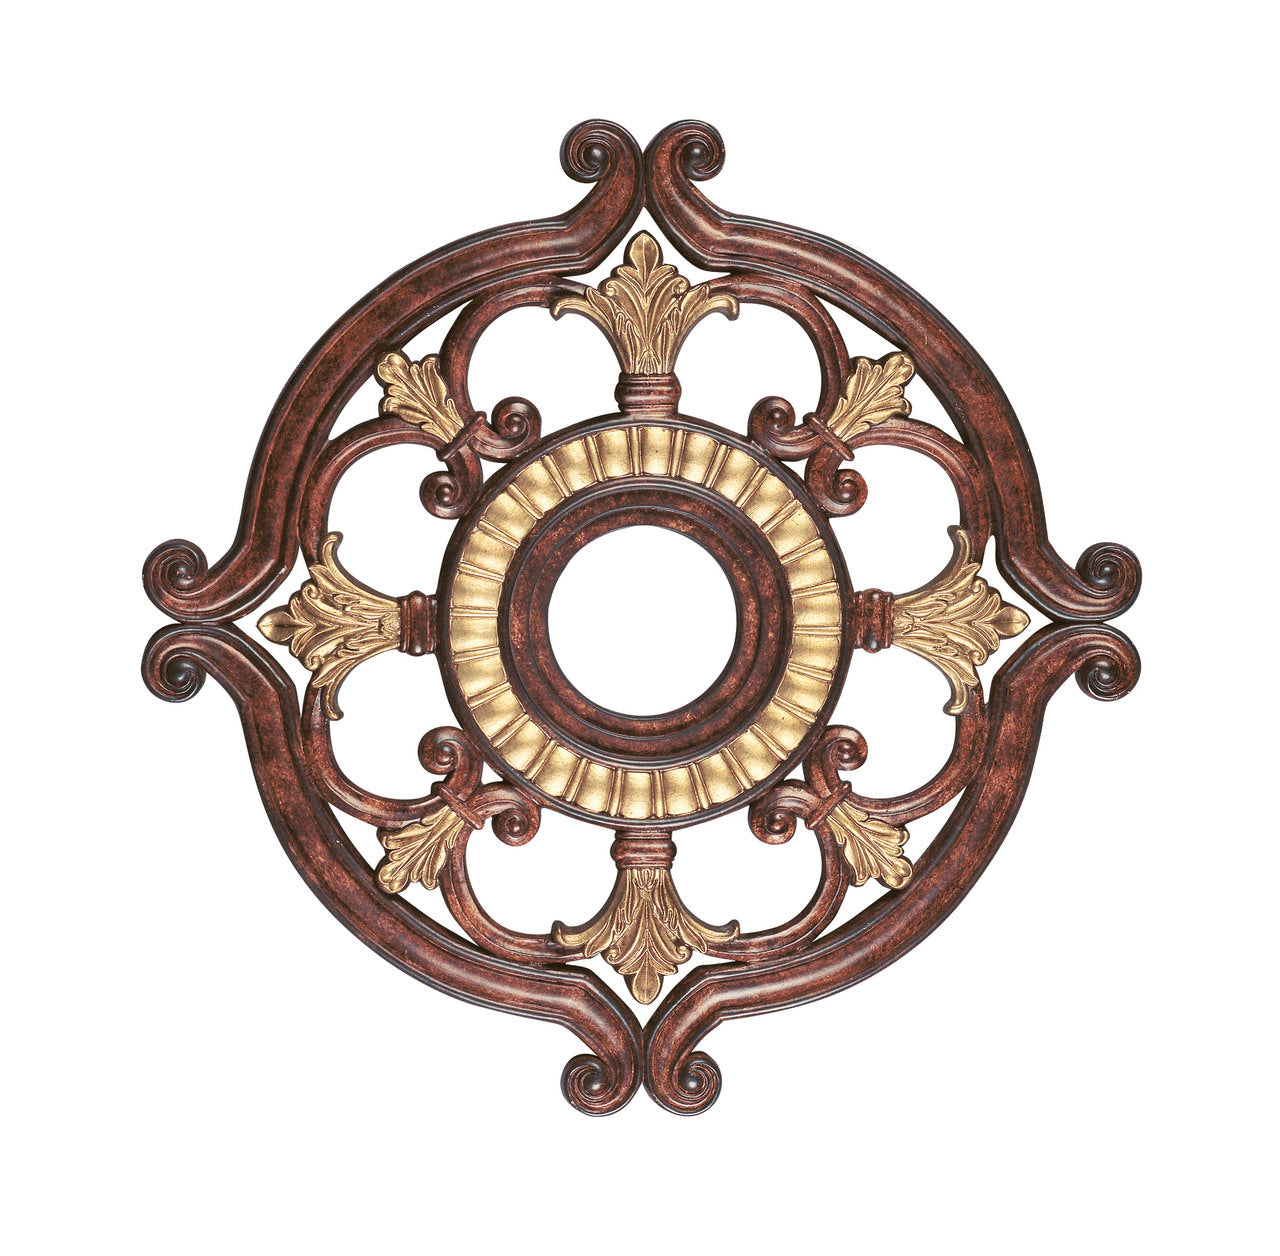 LIVEX Lighting 8216-63 Ceiling Medallion in Verona Bronze with Aged Gold Leaf Accents